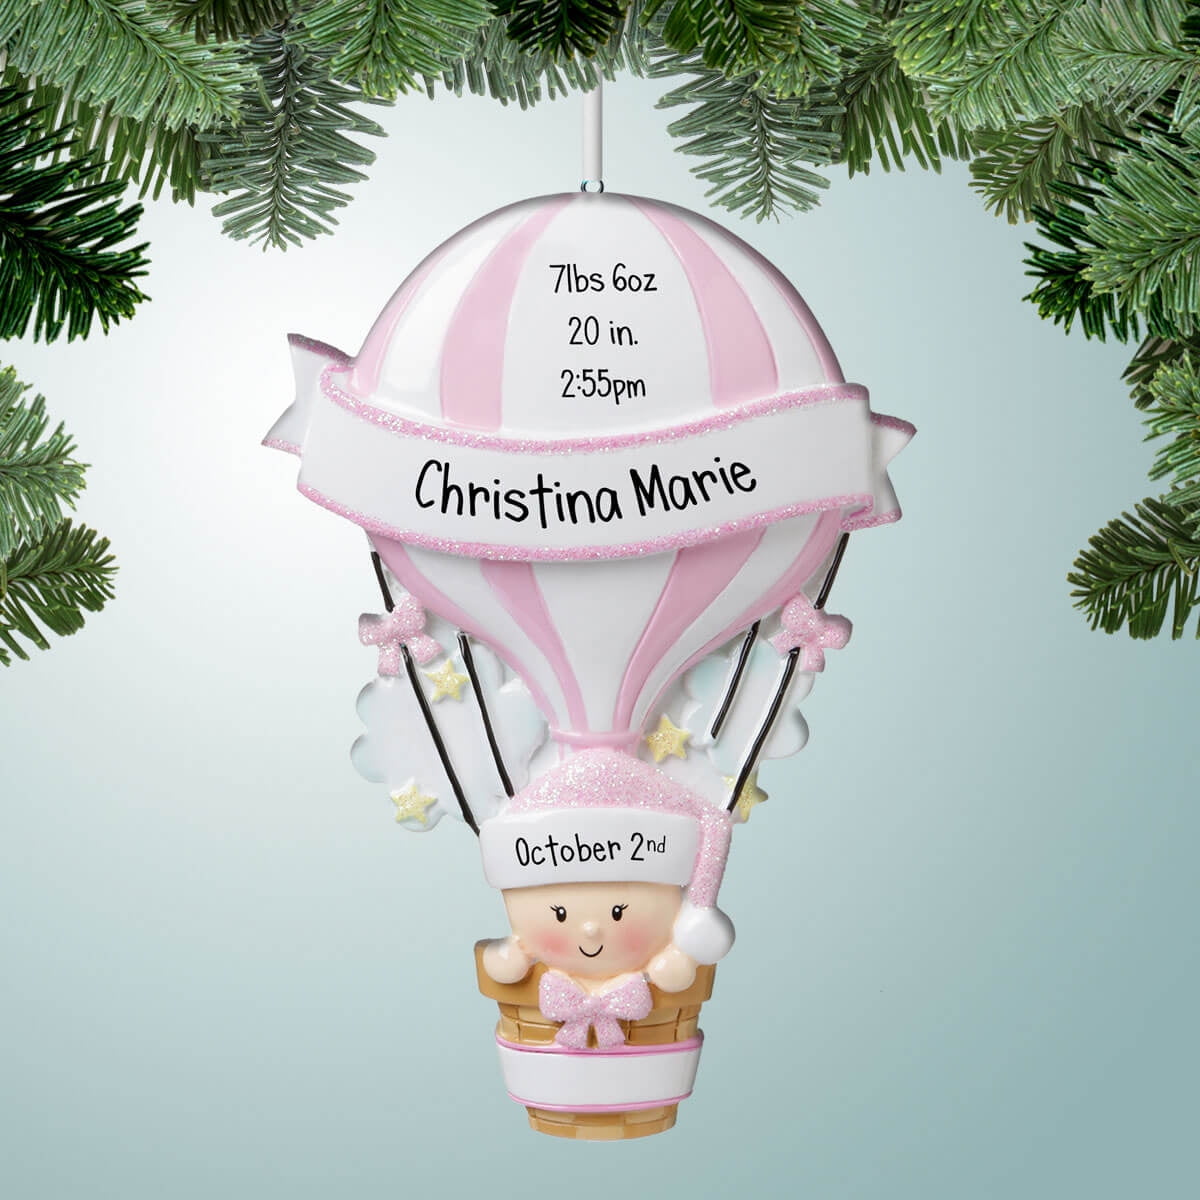 Baby'S 1st Christmas Personalized Christmas Tree Ornament X-mass NEW PINK GIRL